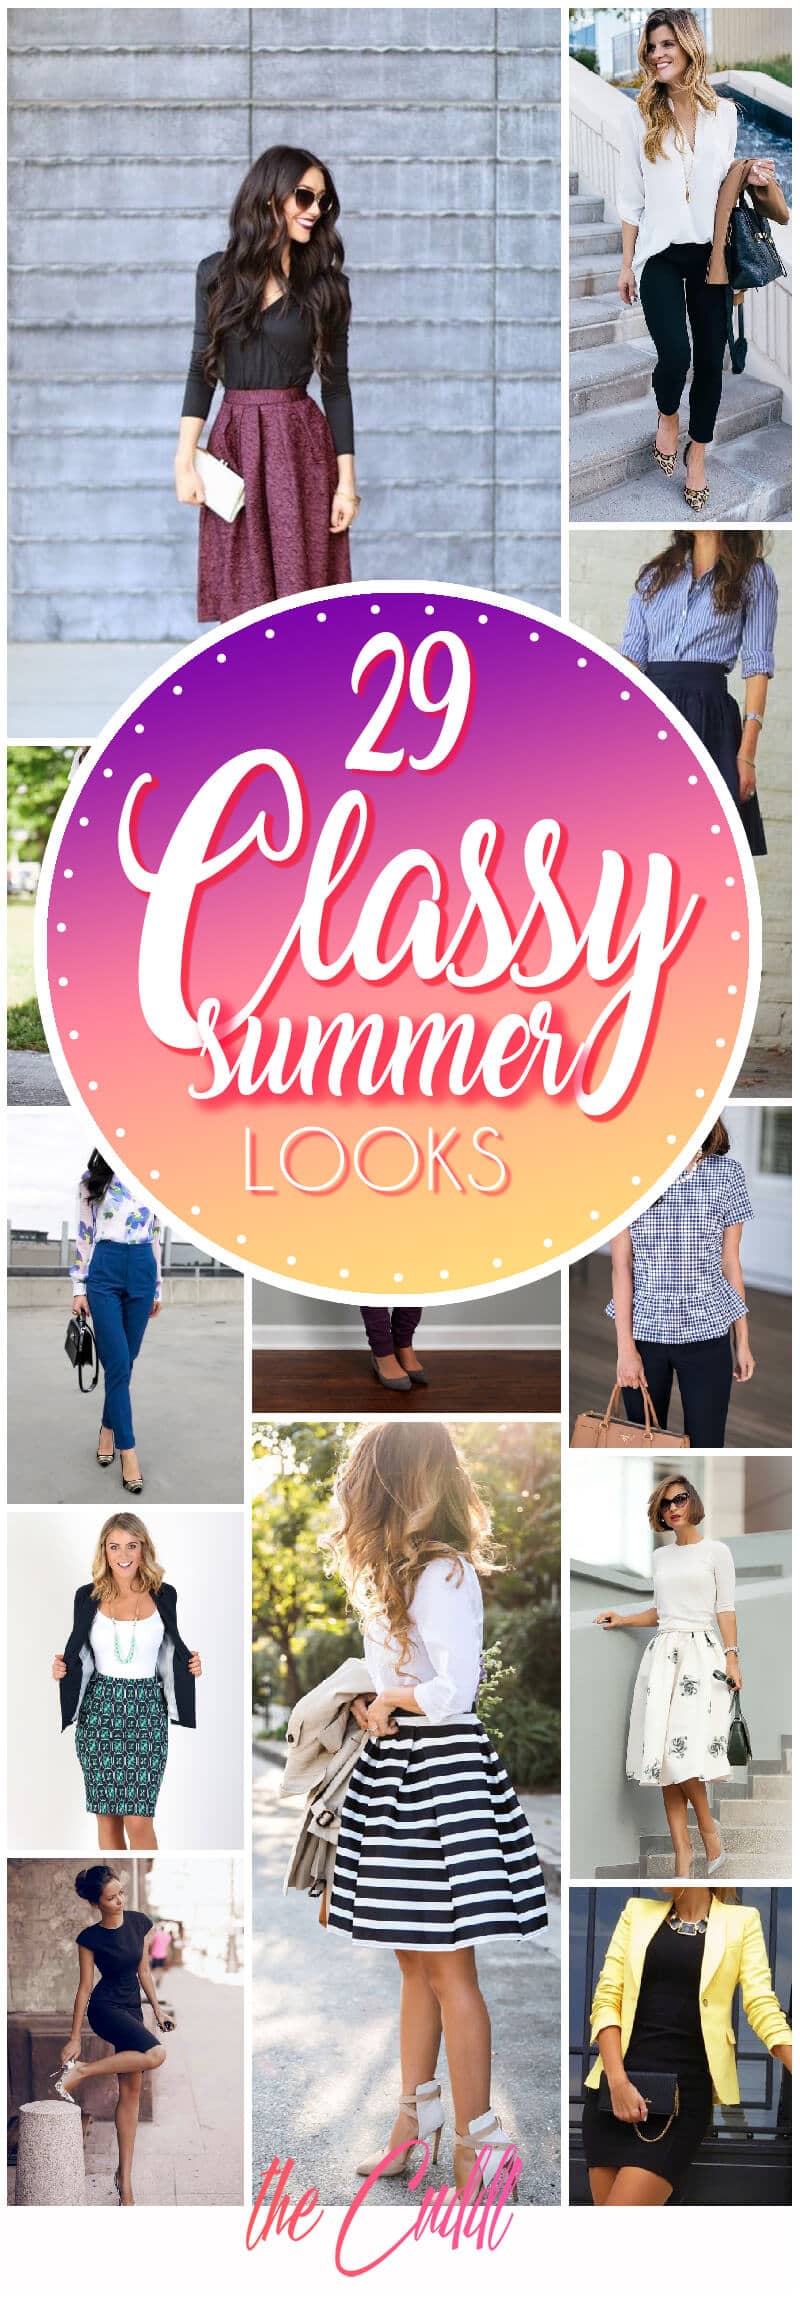 29 Classy And Elegant Summer Outfits